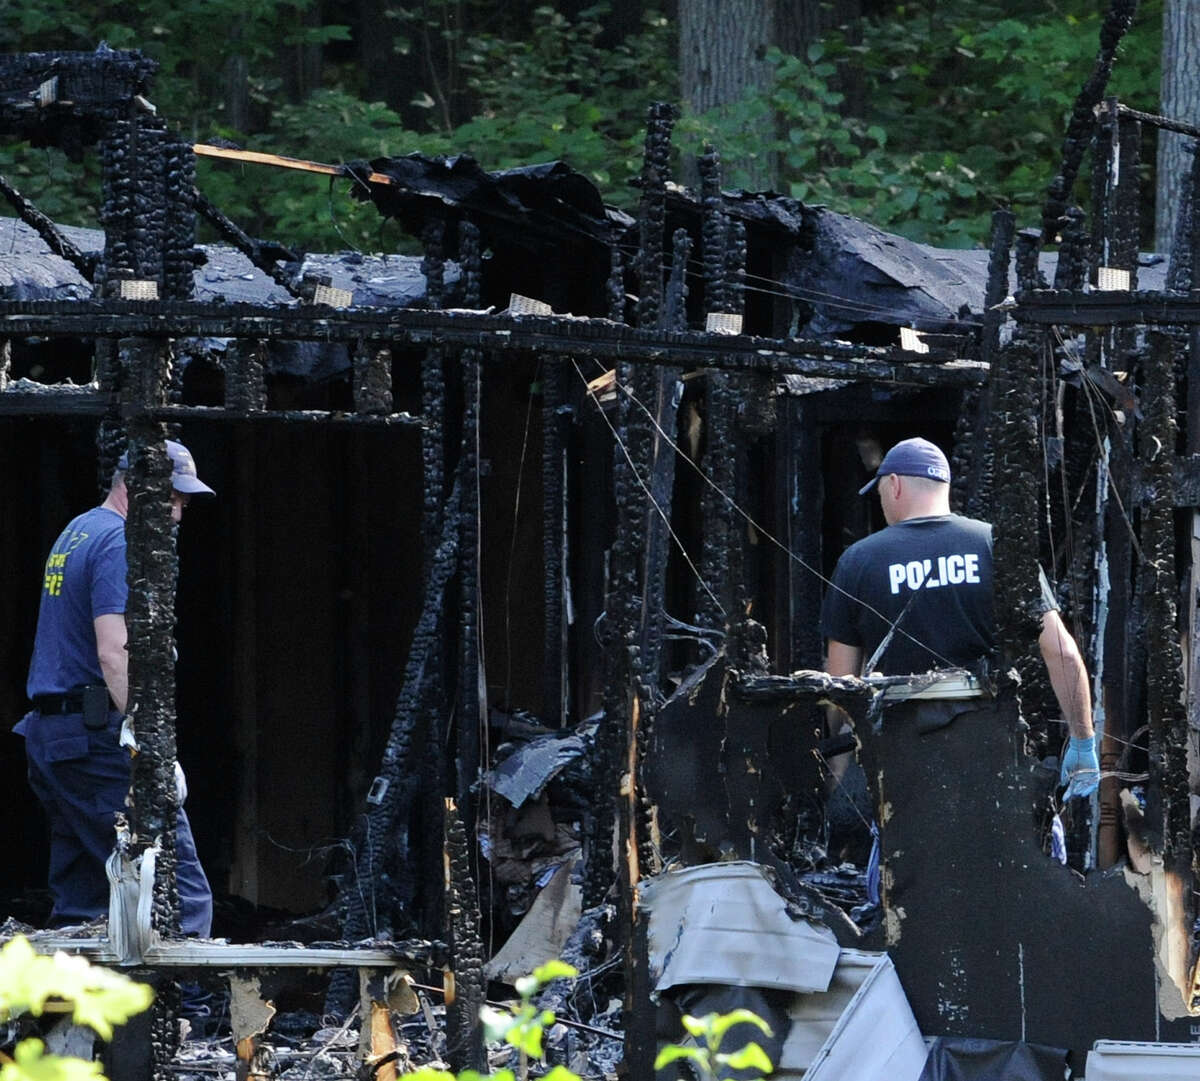 New York State Fire Investigators assist Washington County authorities in sifting through the debris Thursday morning July 14, 2011 at 118 Turnpike Road in White Creek, N.Y. to determine the cause of a fire that has been labeled suspicious and may have contributed to the lose of three lives at that location. (Skip Dickstein / Times Union)